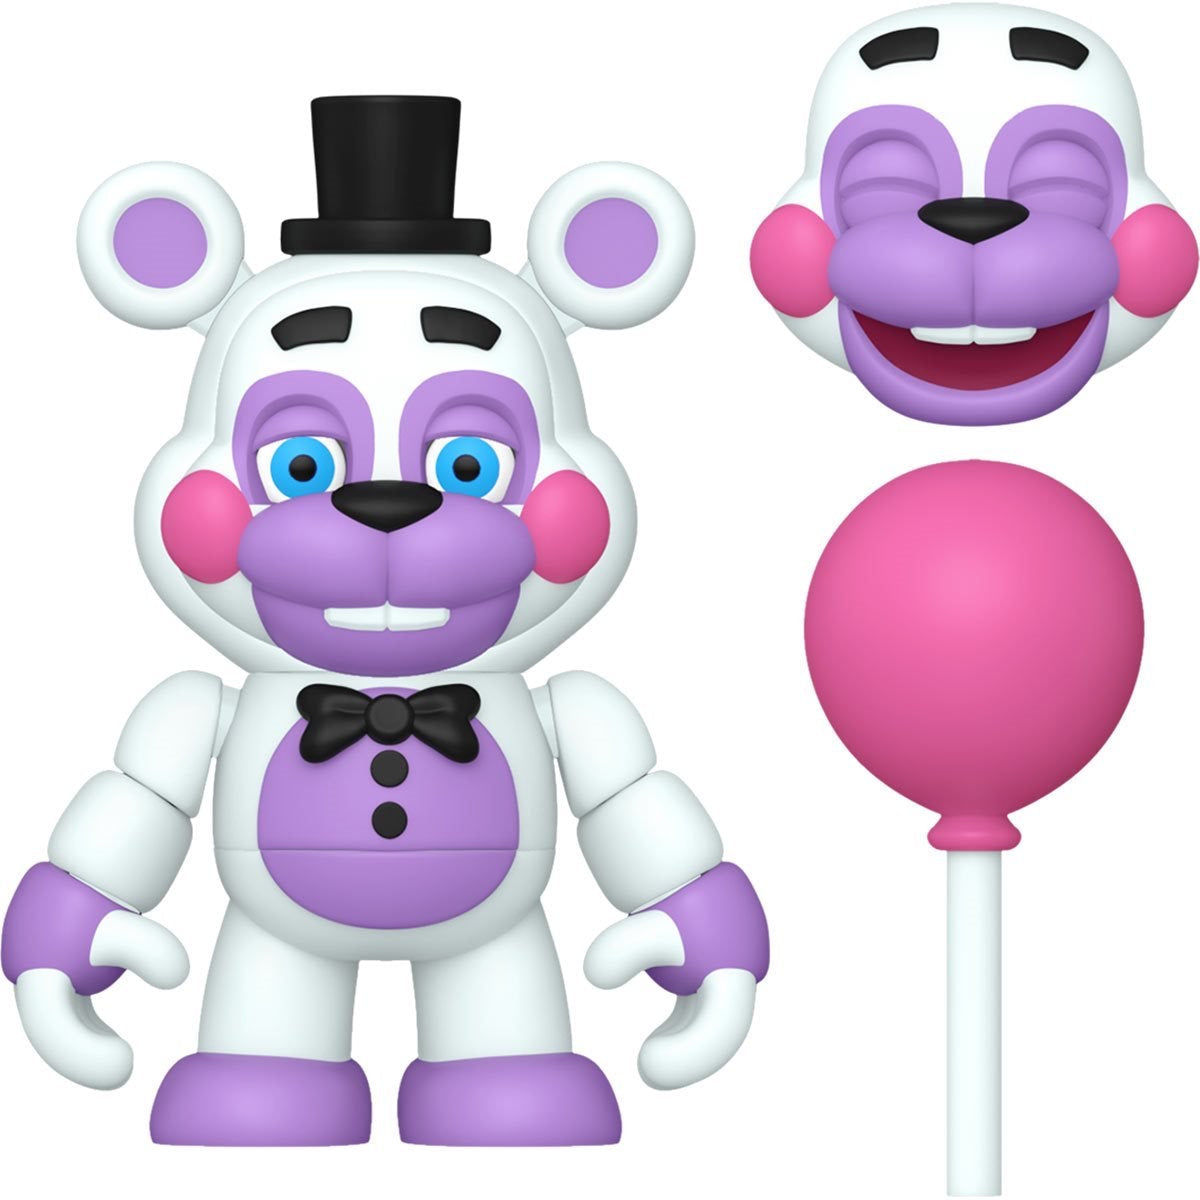 Funko Five Nights at Freddy's: Security Breach Helpy Snap Mini-Figure